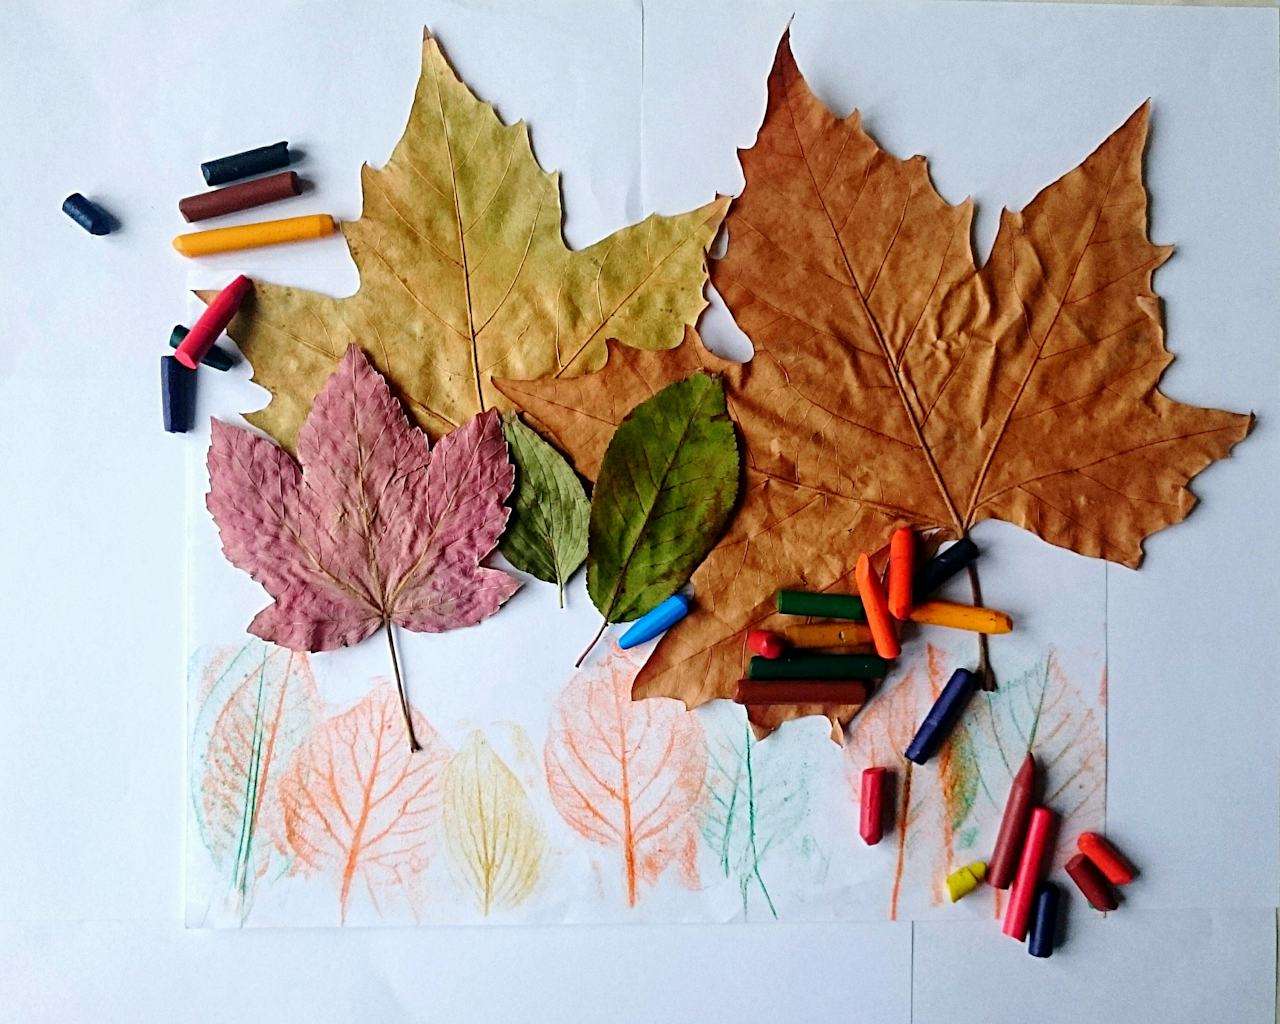 Making roses out of Autumn leaves